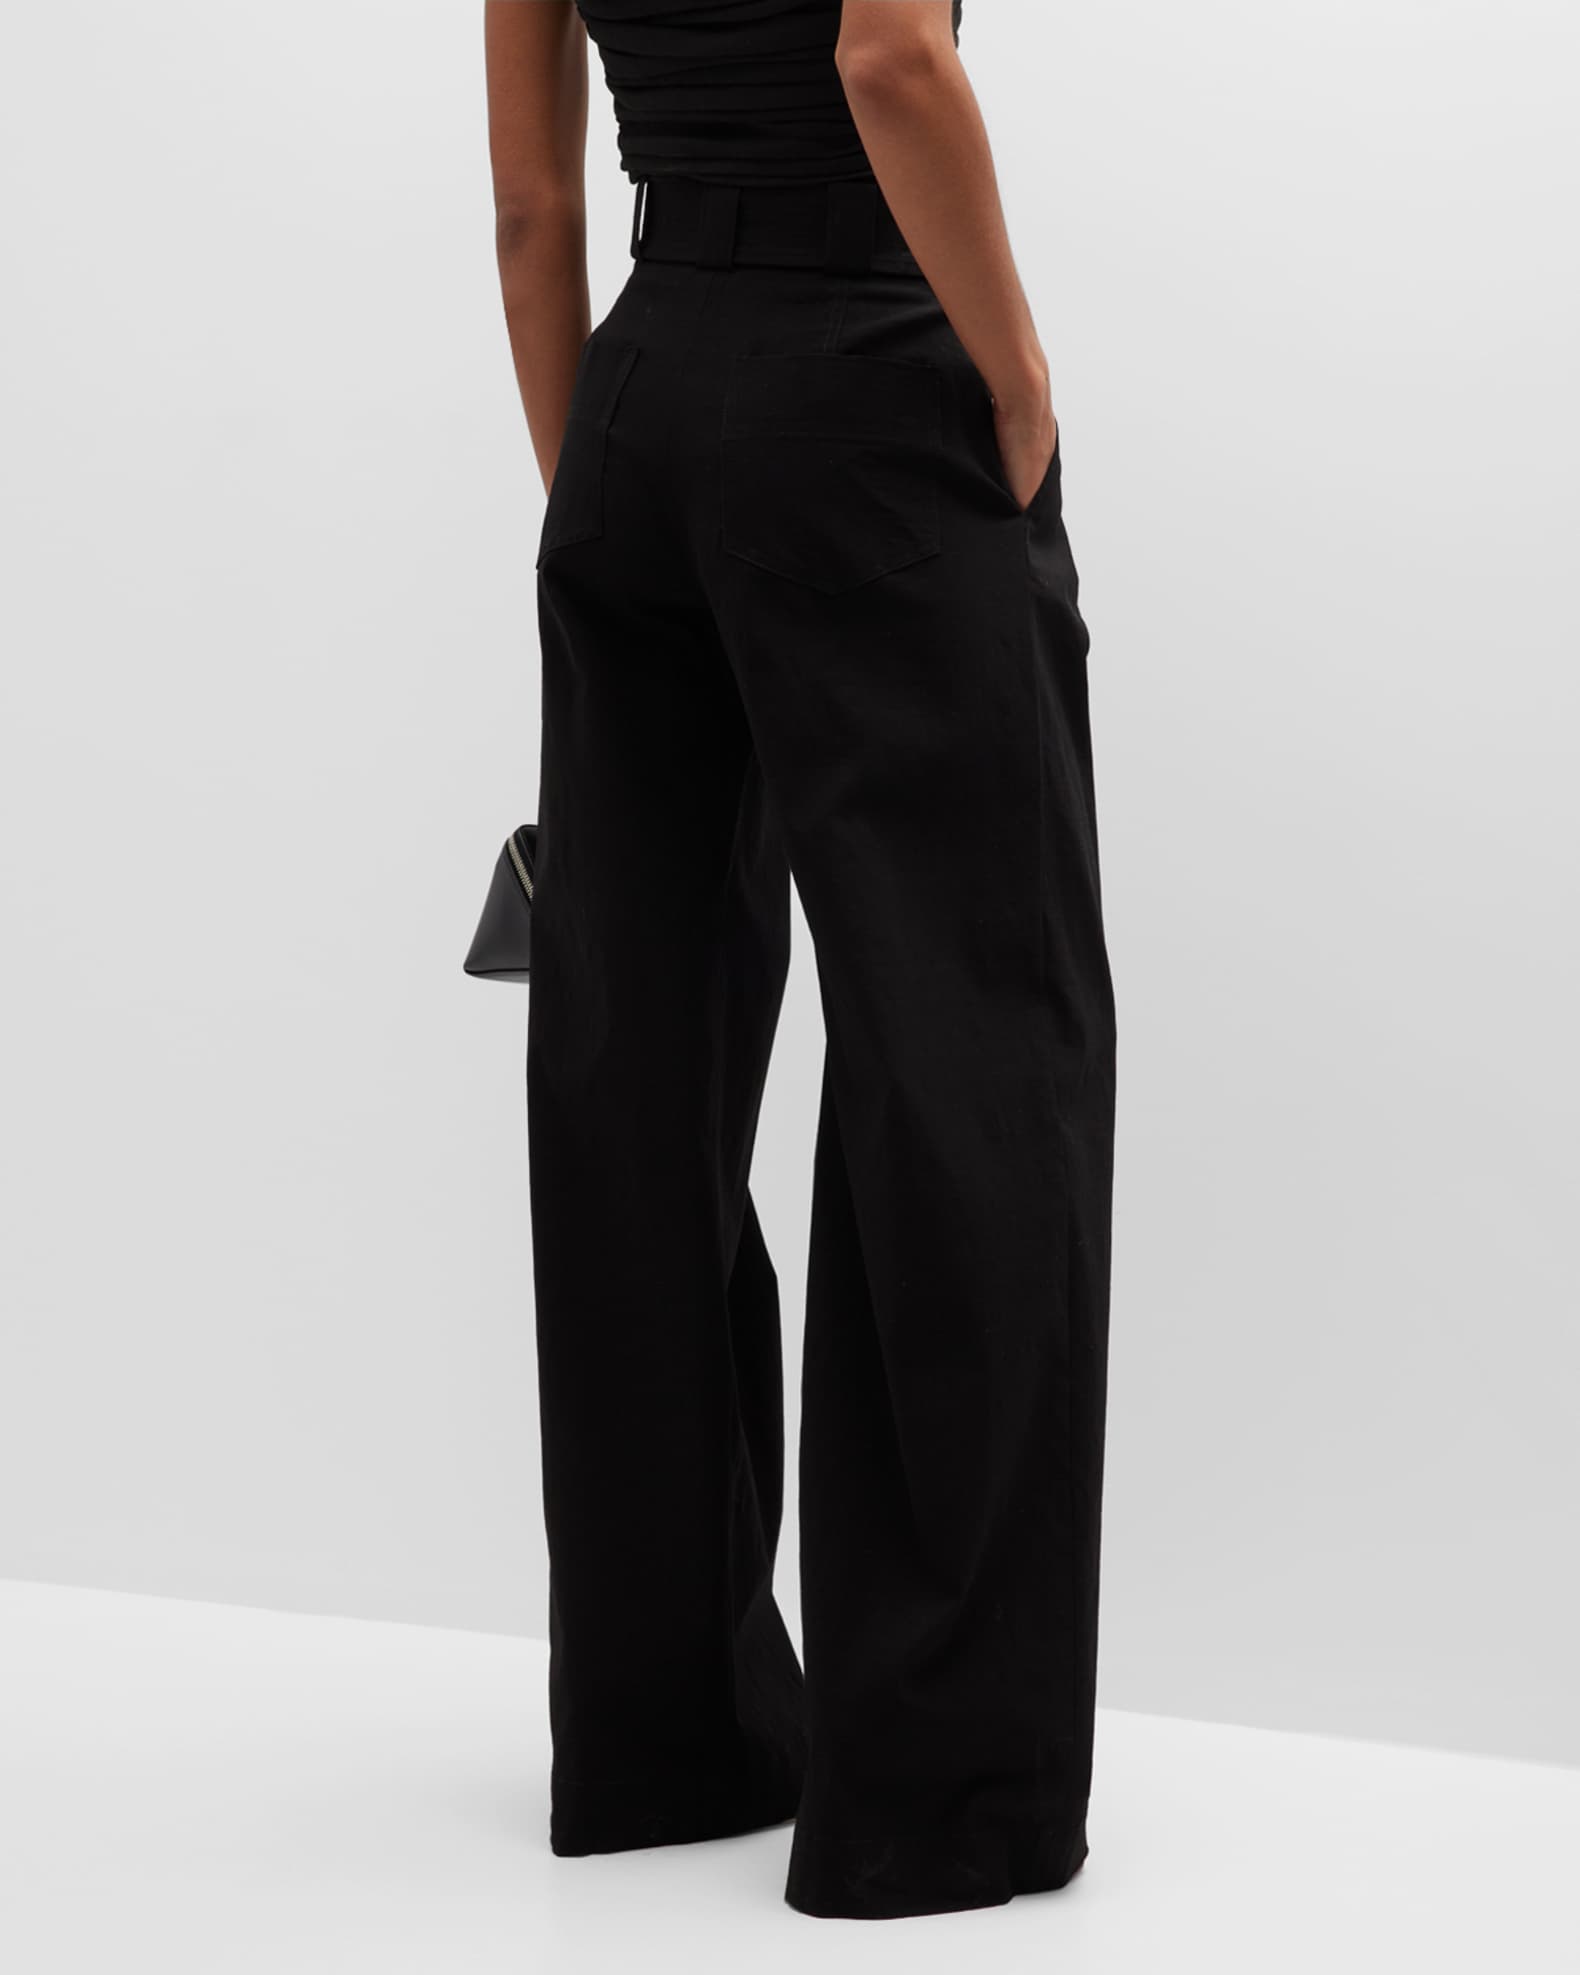 A.L.C. Darby Belted Wide-Leg Pants | Neiman Marcus